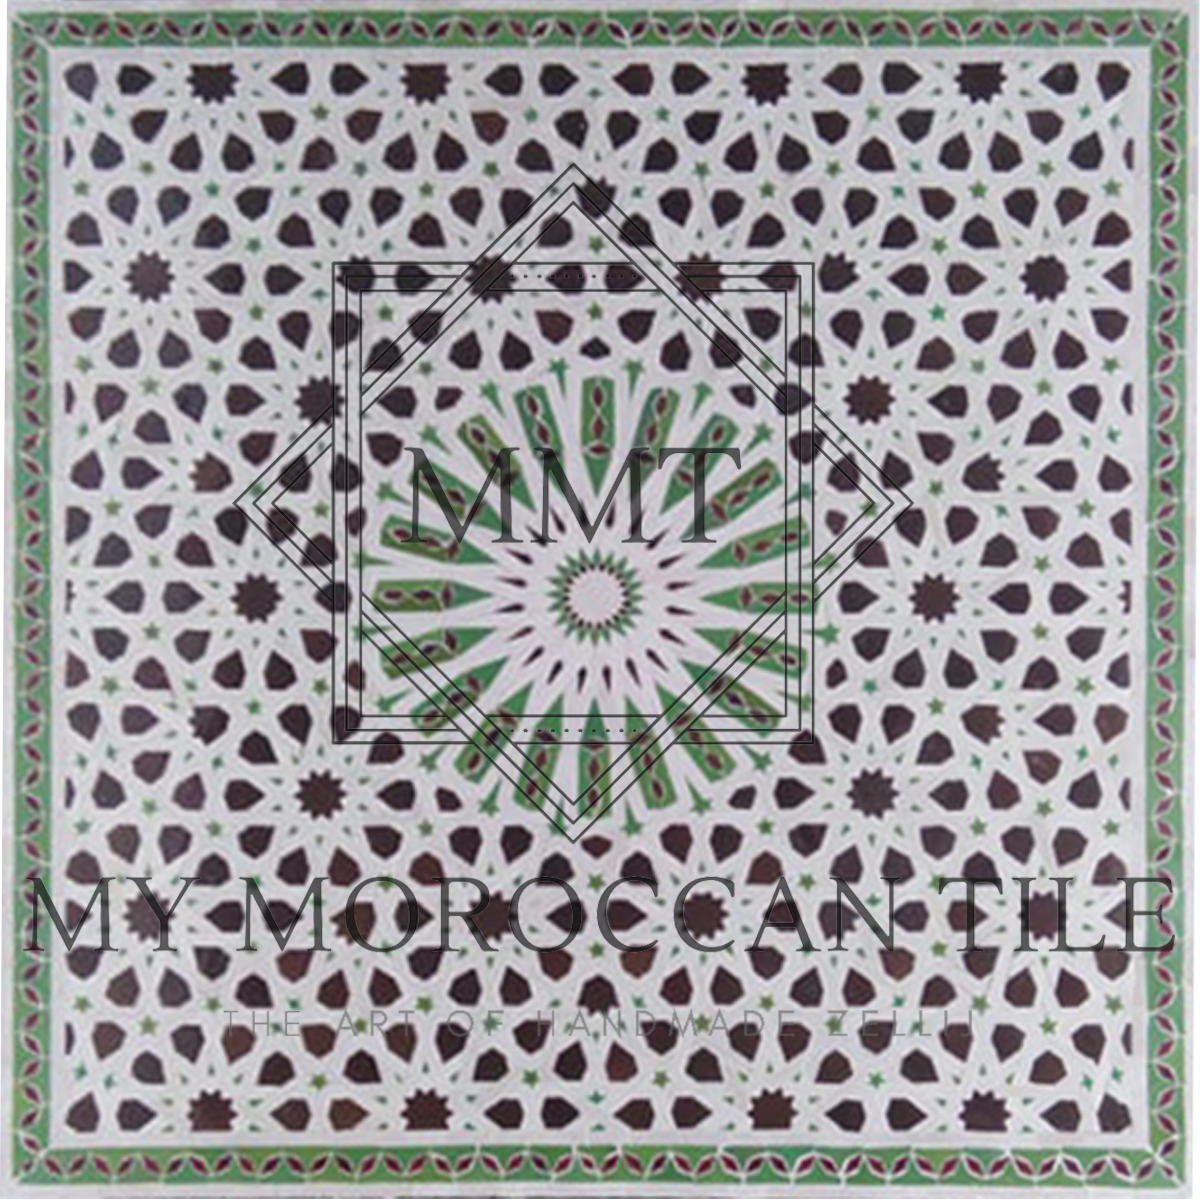 20 Fold Square Moroccan Mosaic Table Top 20119